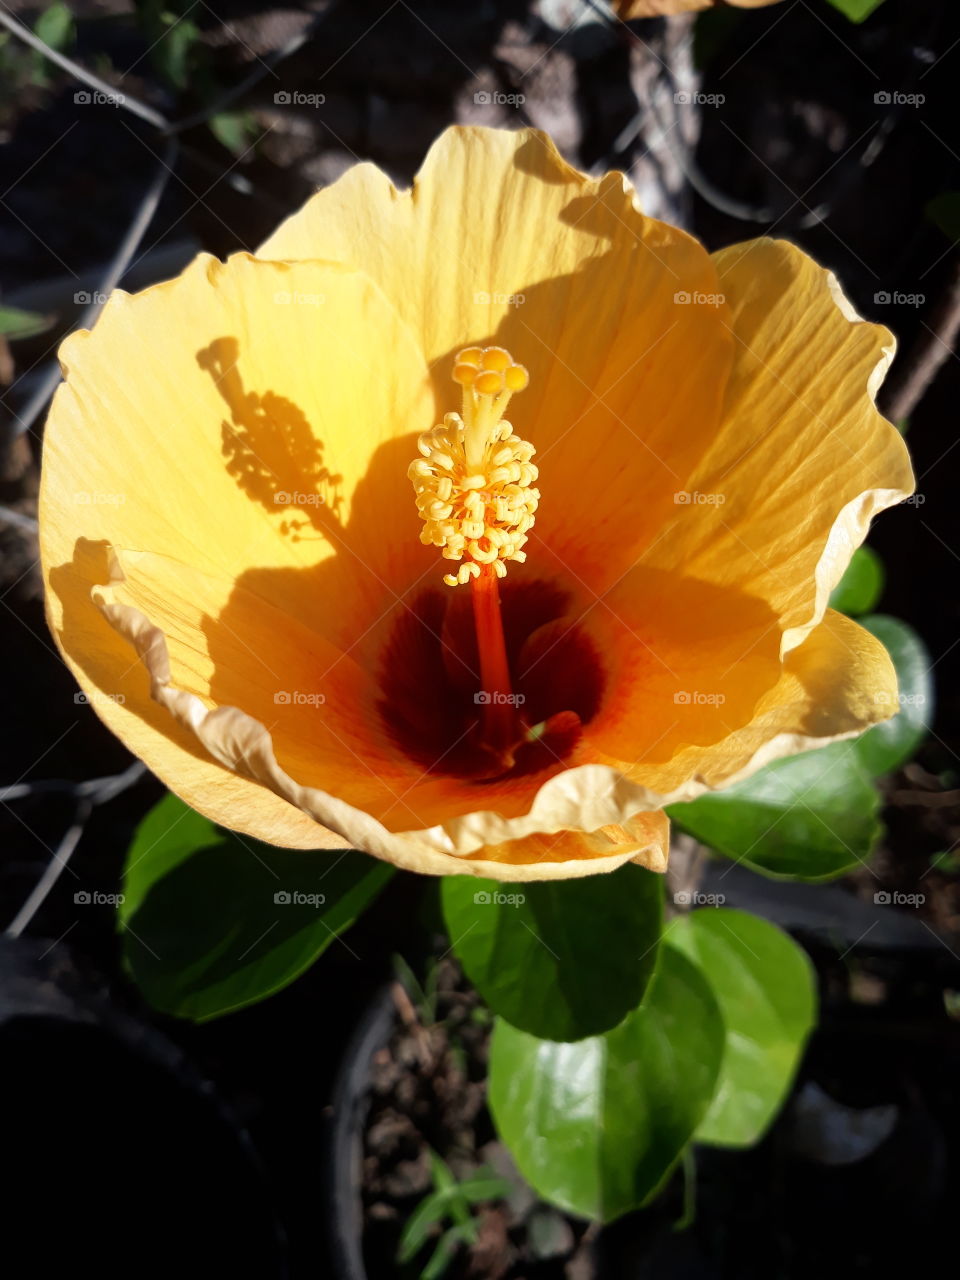 Beautiful golden yellow hibiscus, ready to conquer the morning sun, waiting to bloom to its fullest. I's called Gumamela in the Philippines.